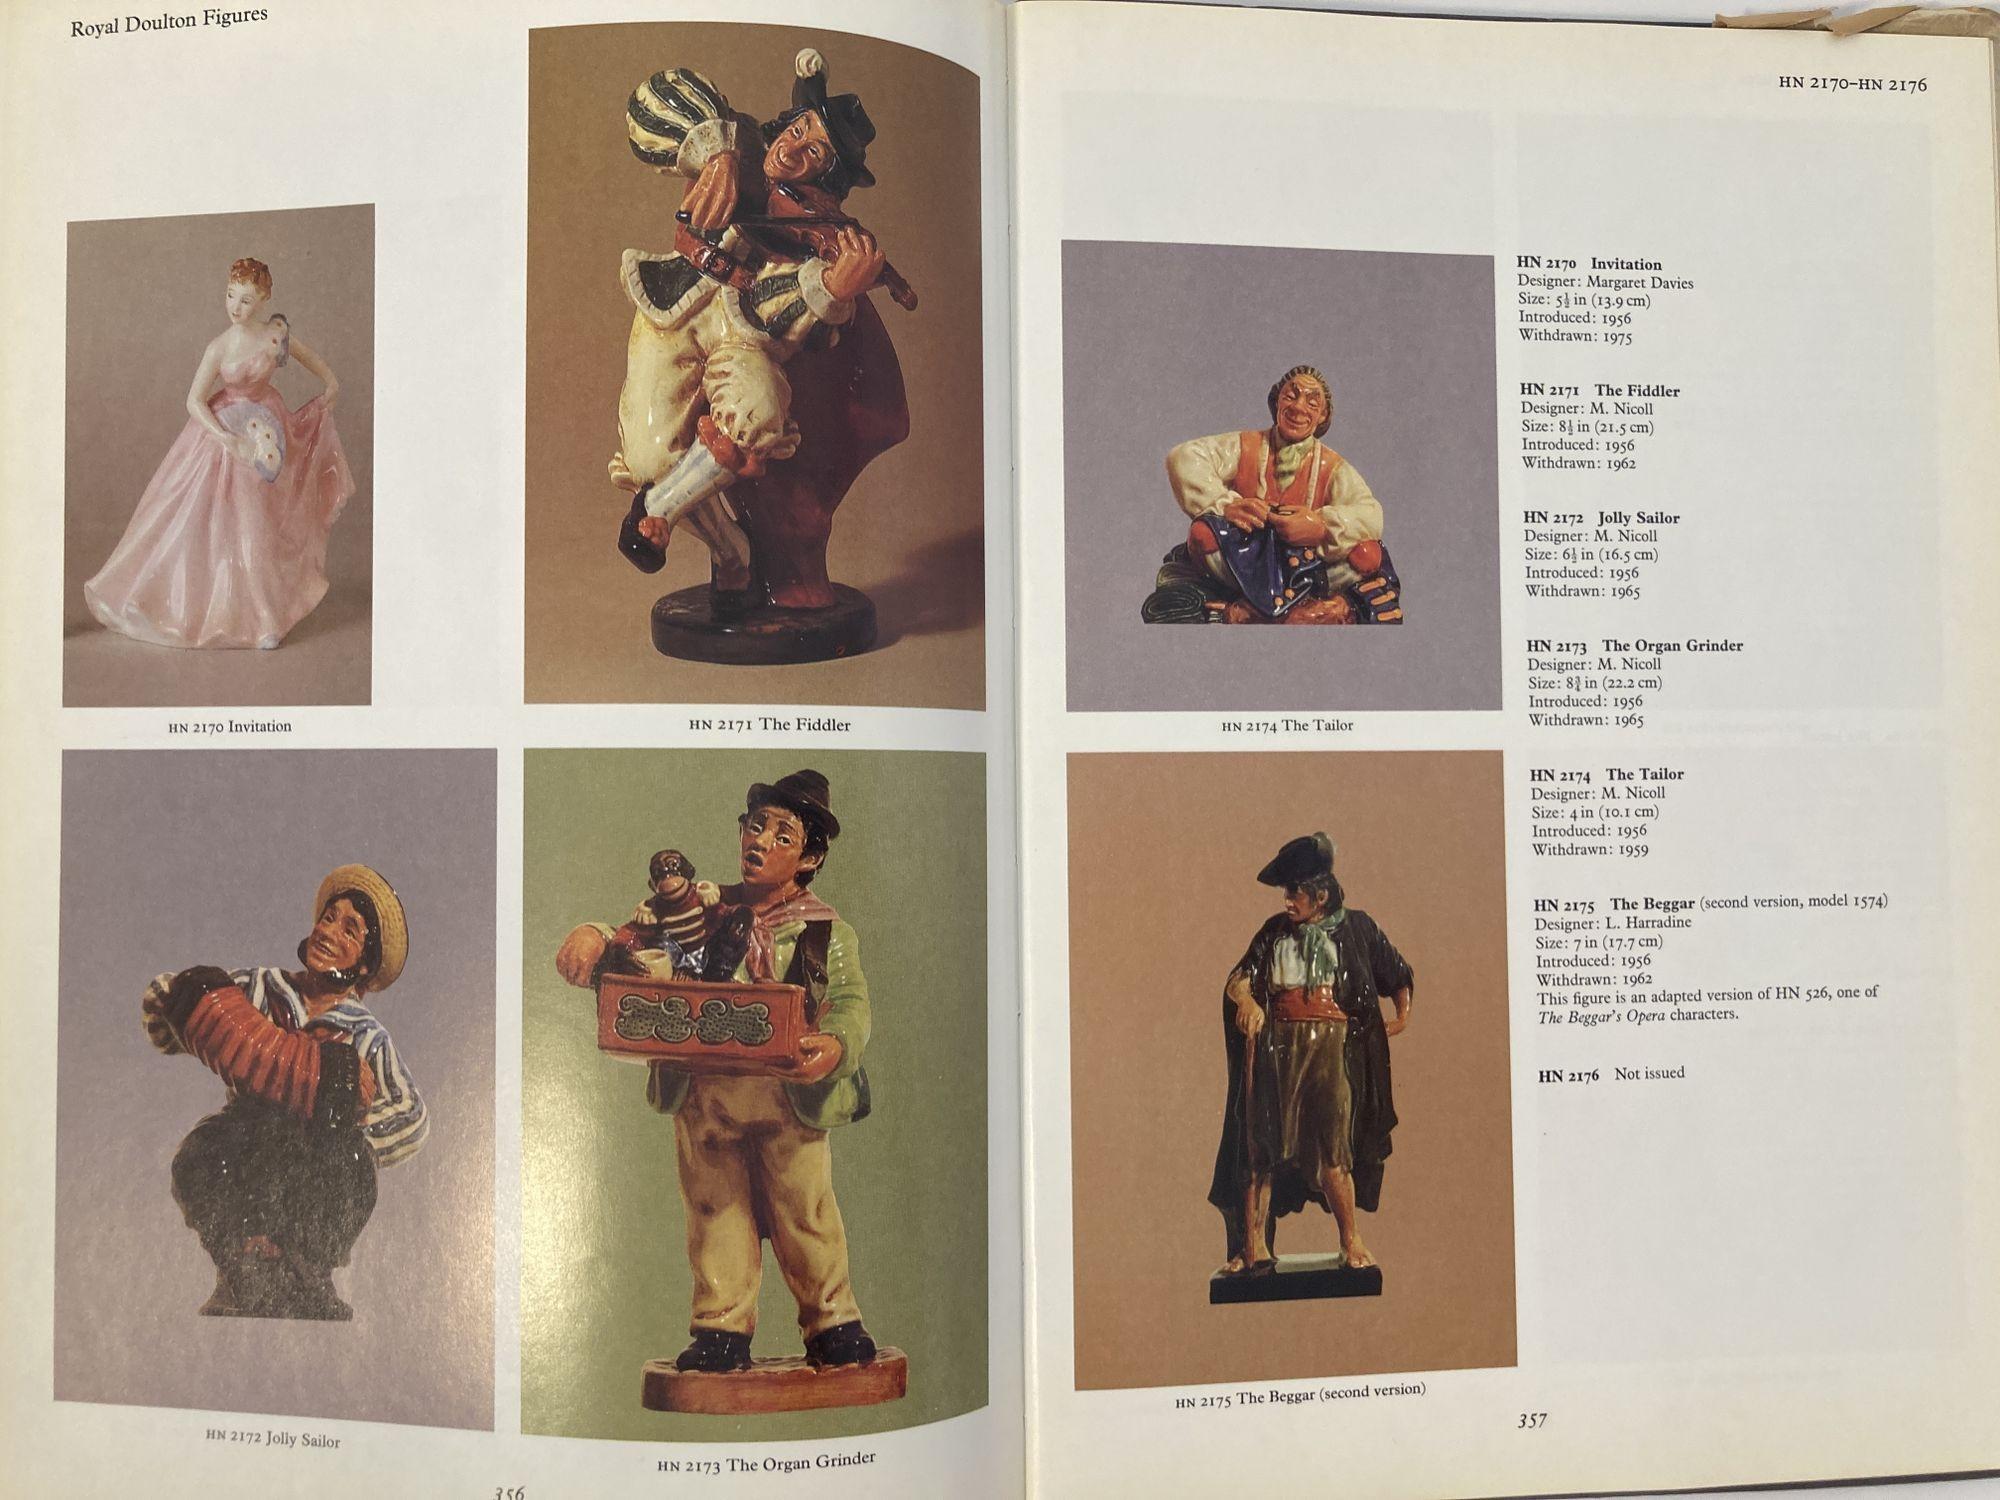 Royal Doulton Figures 1st Ed. Hardcover Book 1979 For Sale 6